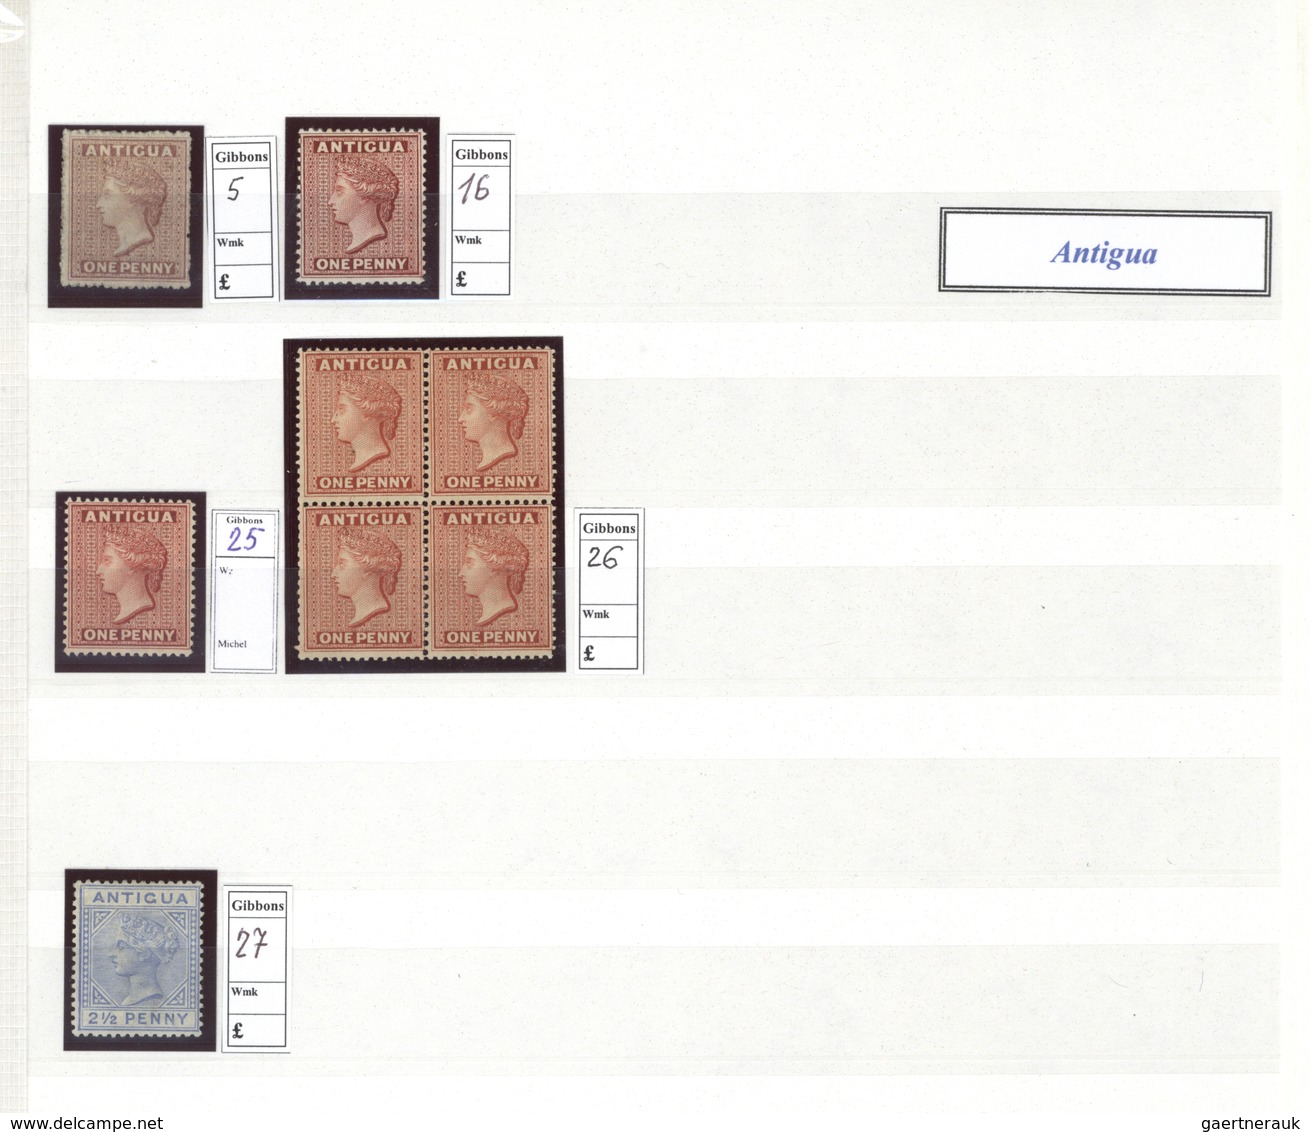 Britische Kolonien: 1851-1901: Mint collection of about 550 Queen Victoria stamps from various Briti